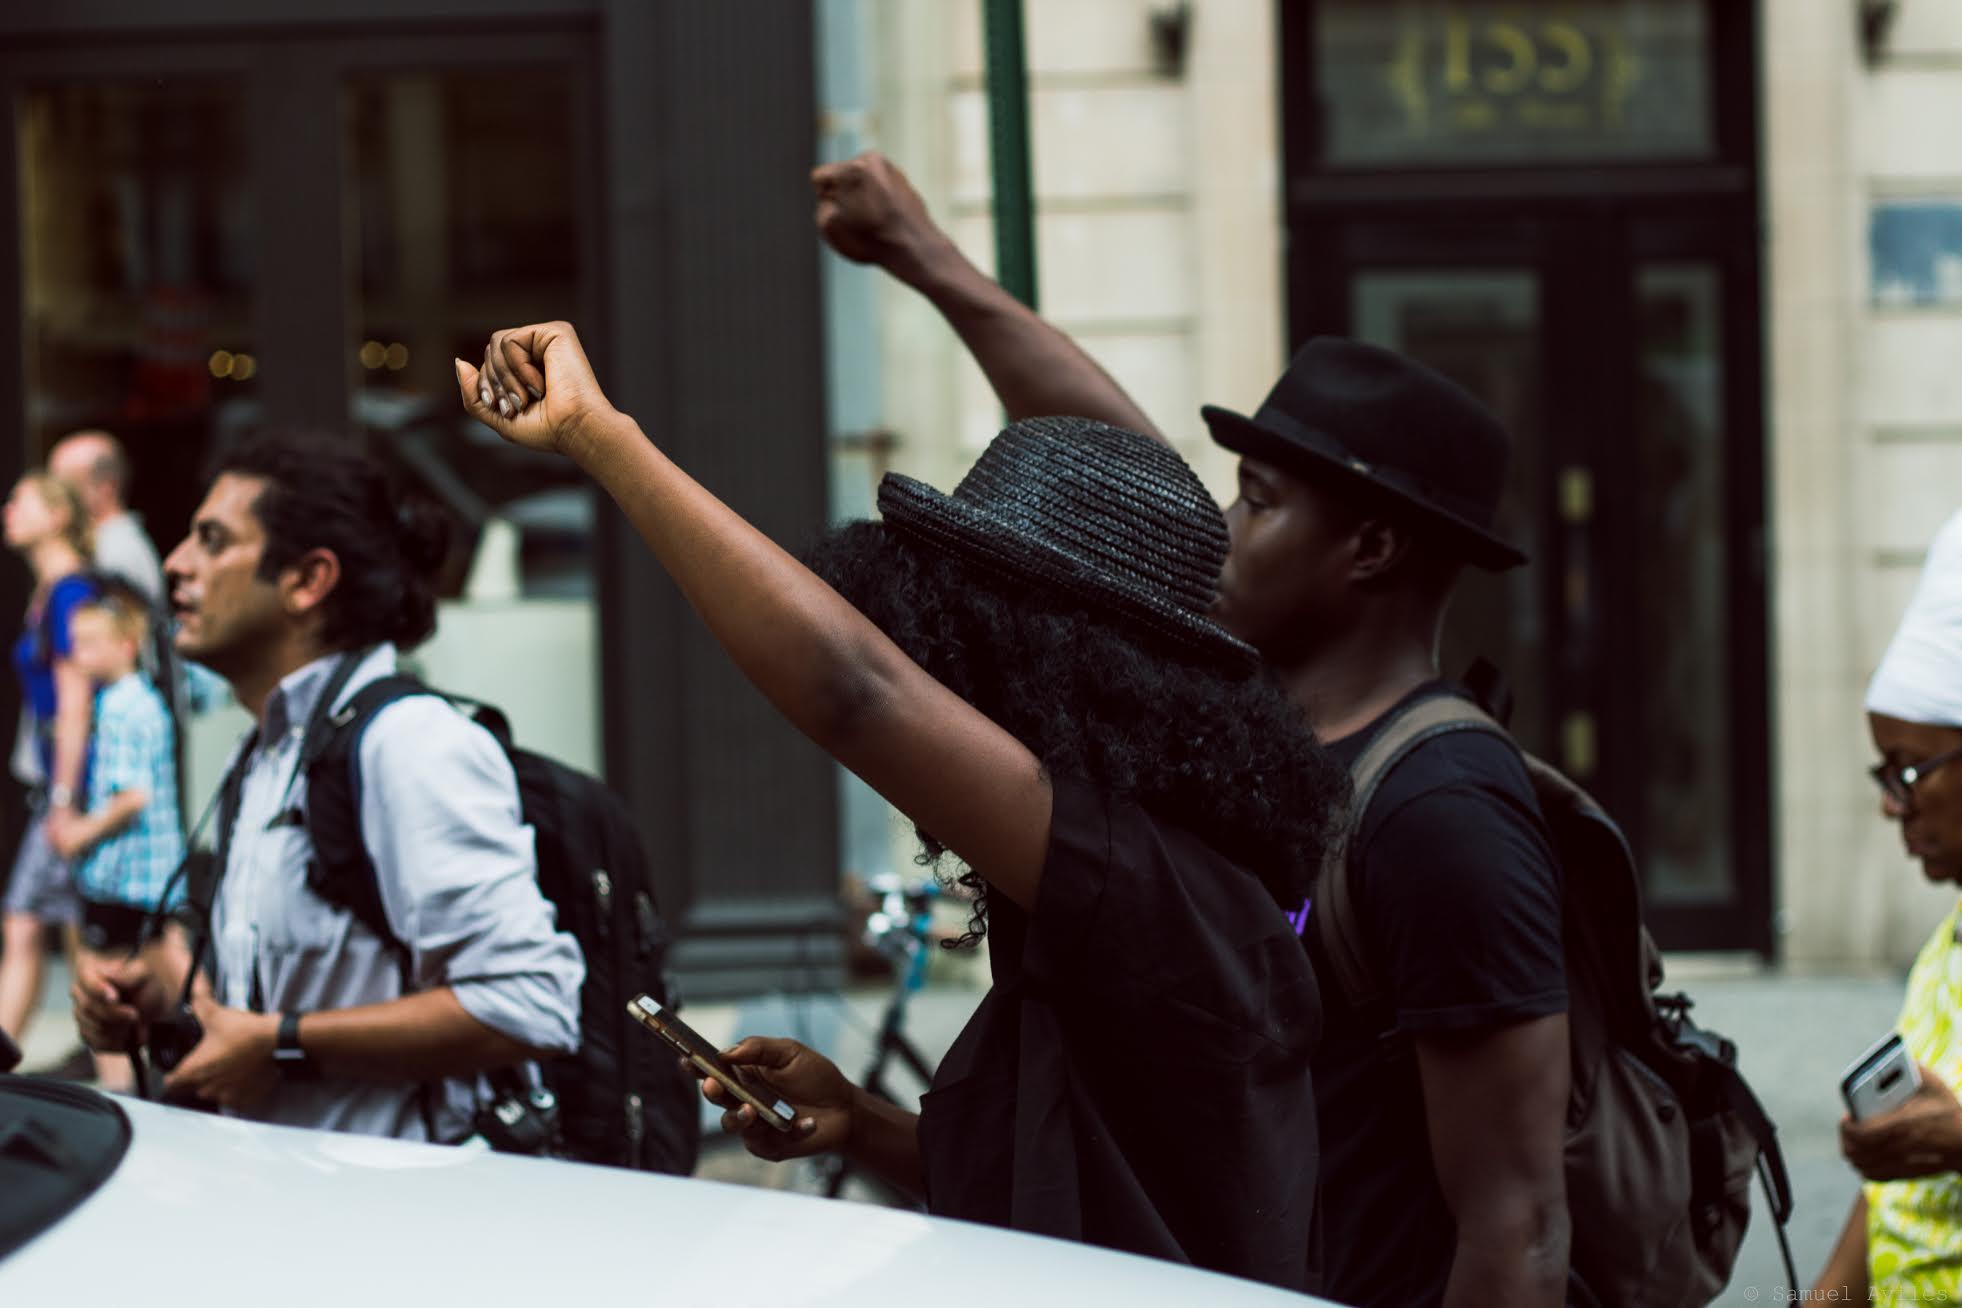 Pair marches in the street during Thursday July 7th, 2016 police brutality protests in Manhattan, New York. The protest is in response to the two recent shootings of black men by the police.